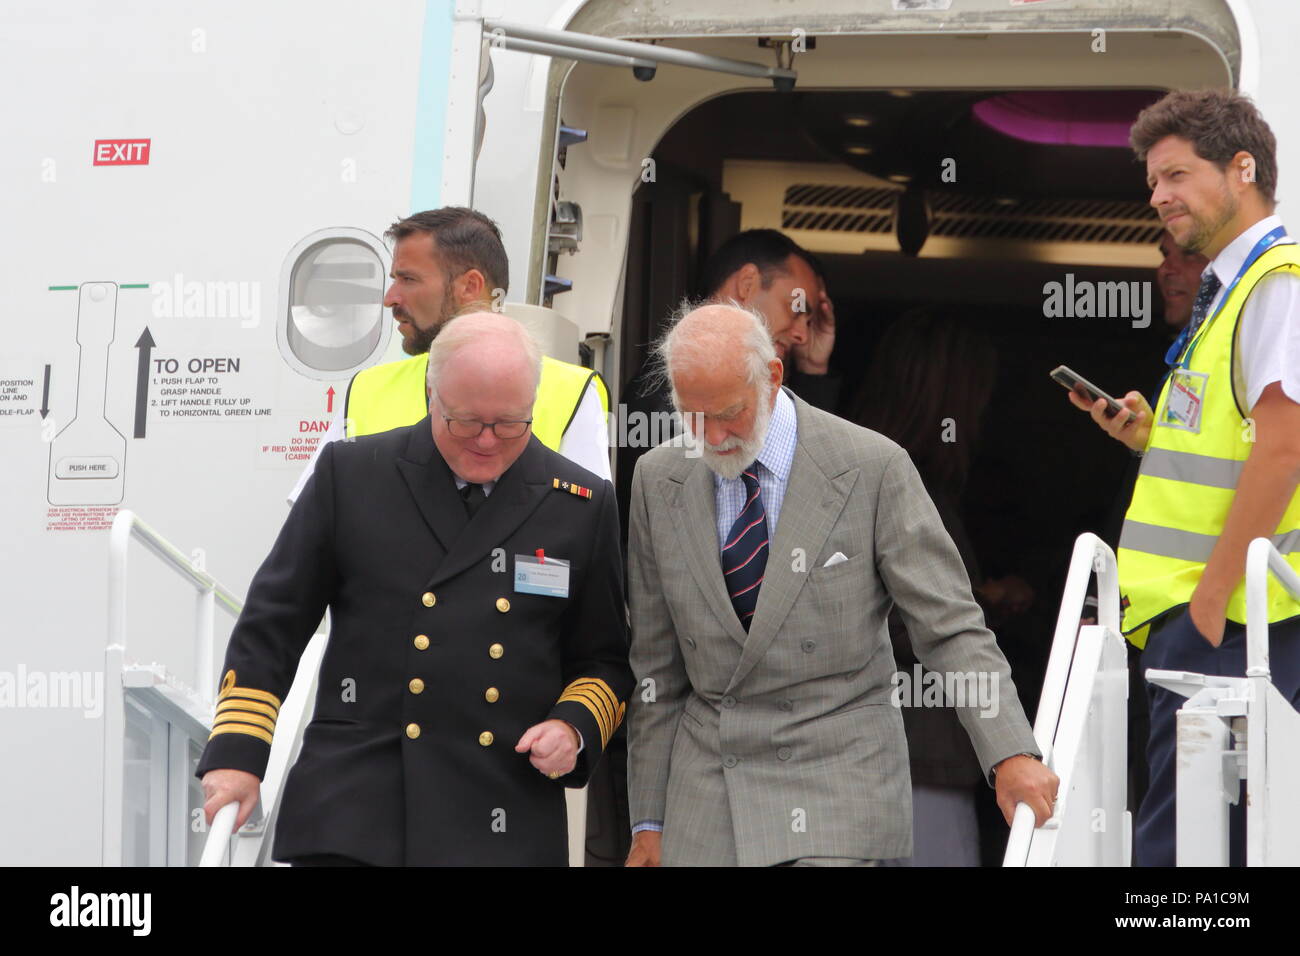 Farnborough, UK. 20th July 2018. Prince Michael of Kent inspected the latest Airbus A220-300 and an A380 in the 'Save the Coral Reefs' livery. He was accompanied by Vice Admiral Lord Sterling of Plaistow. Credit: Uwe Deffner/Alamy Live News Stock Photo